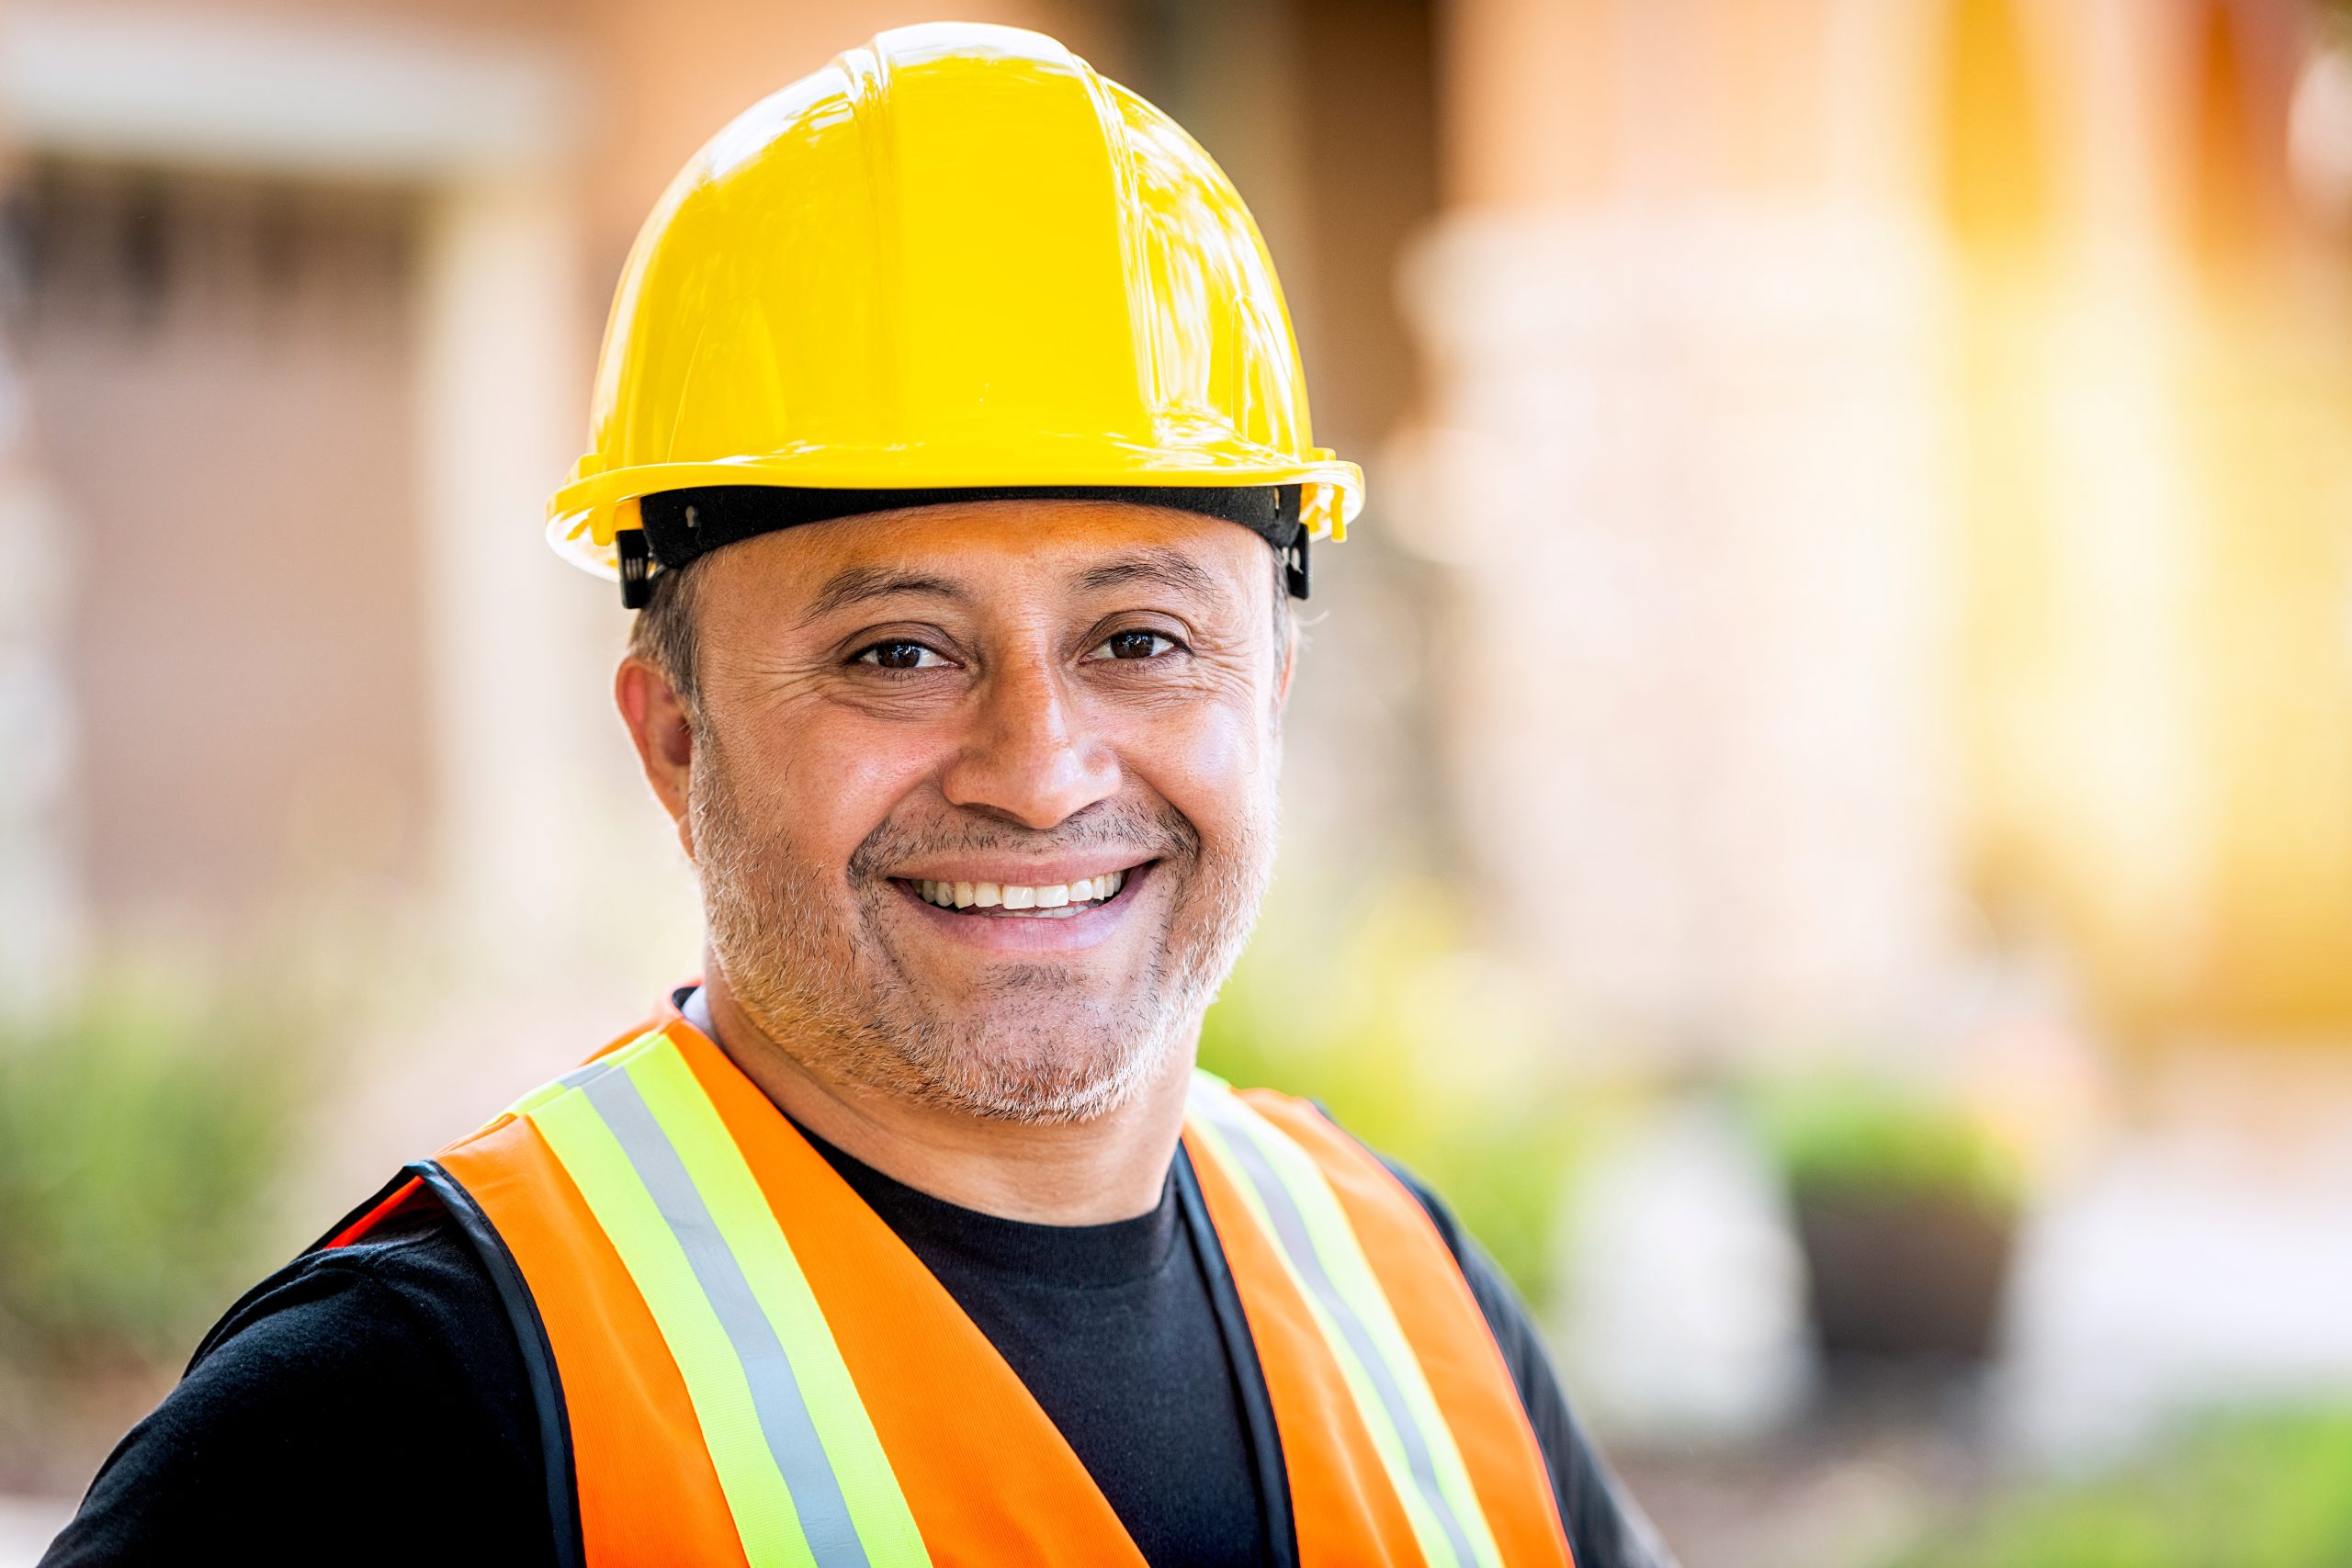 Woman construction worker standing with arms crossed